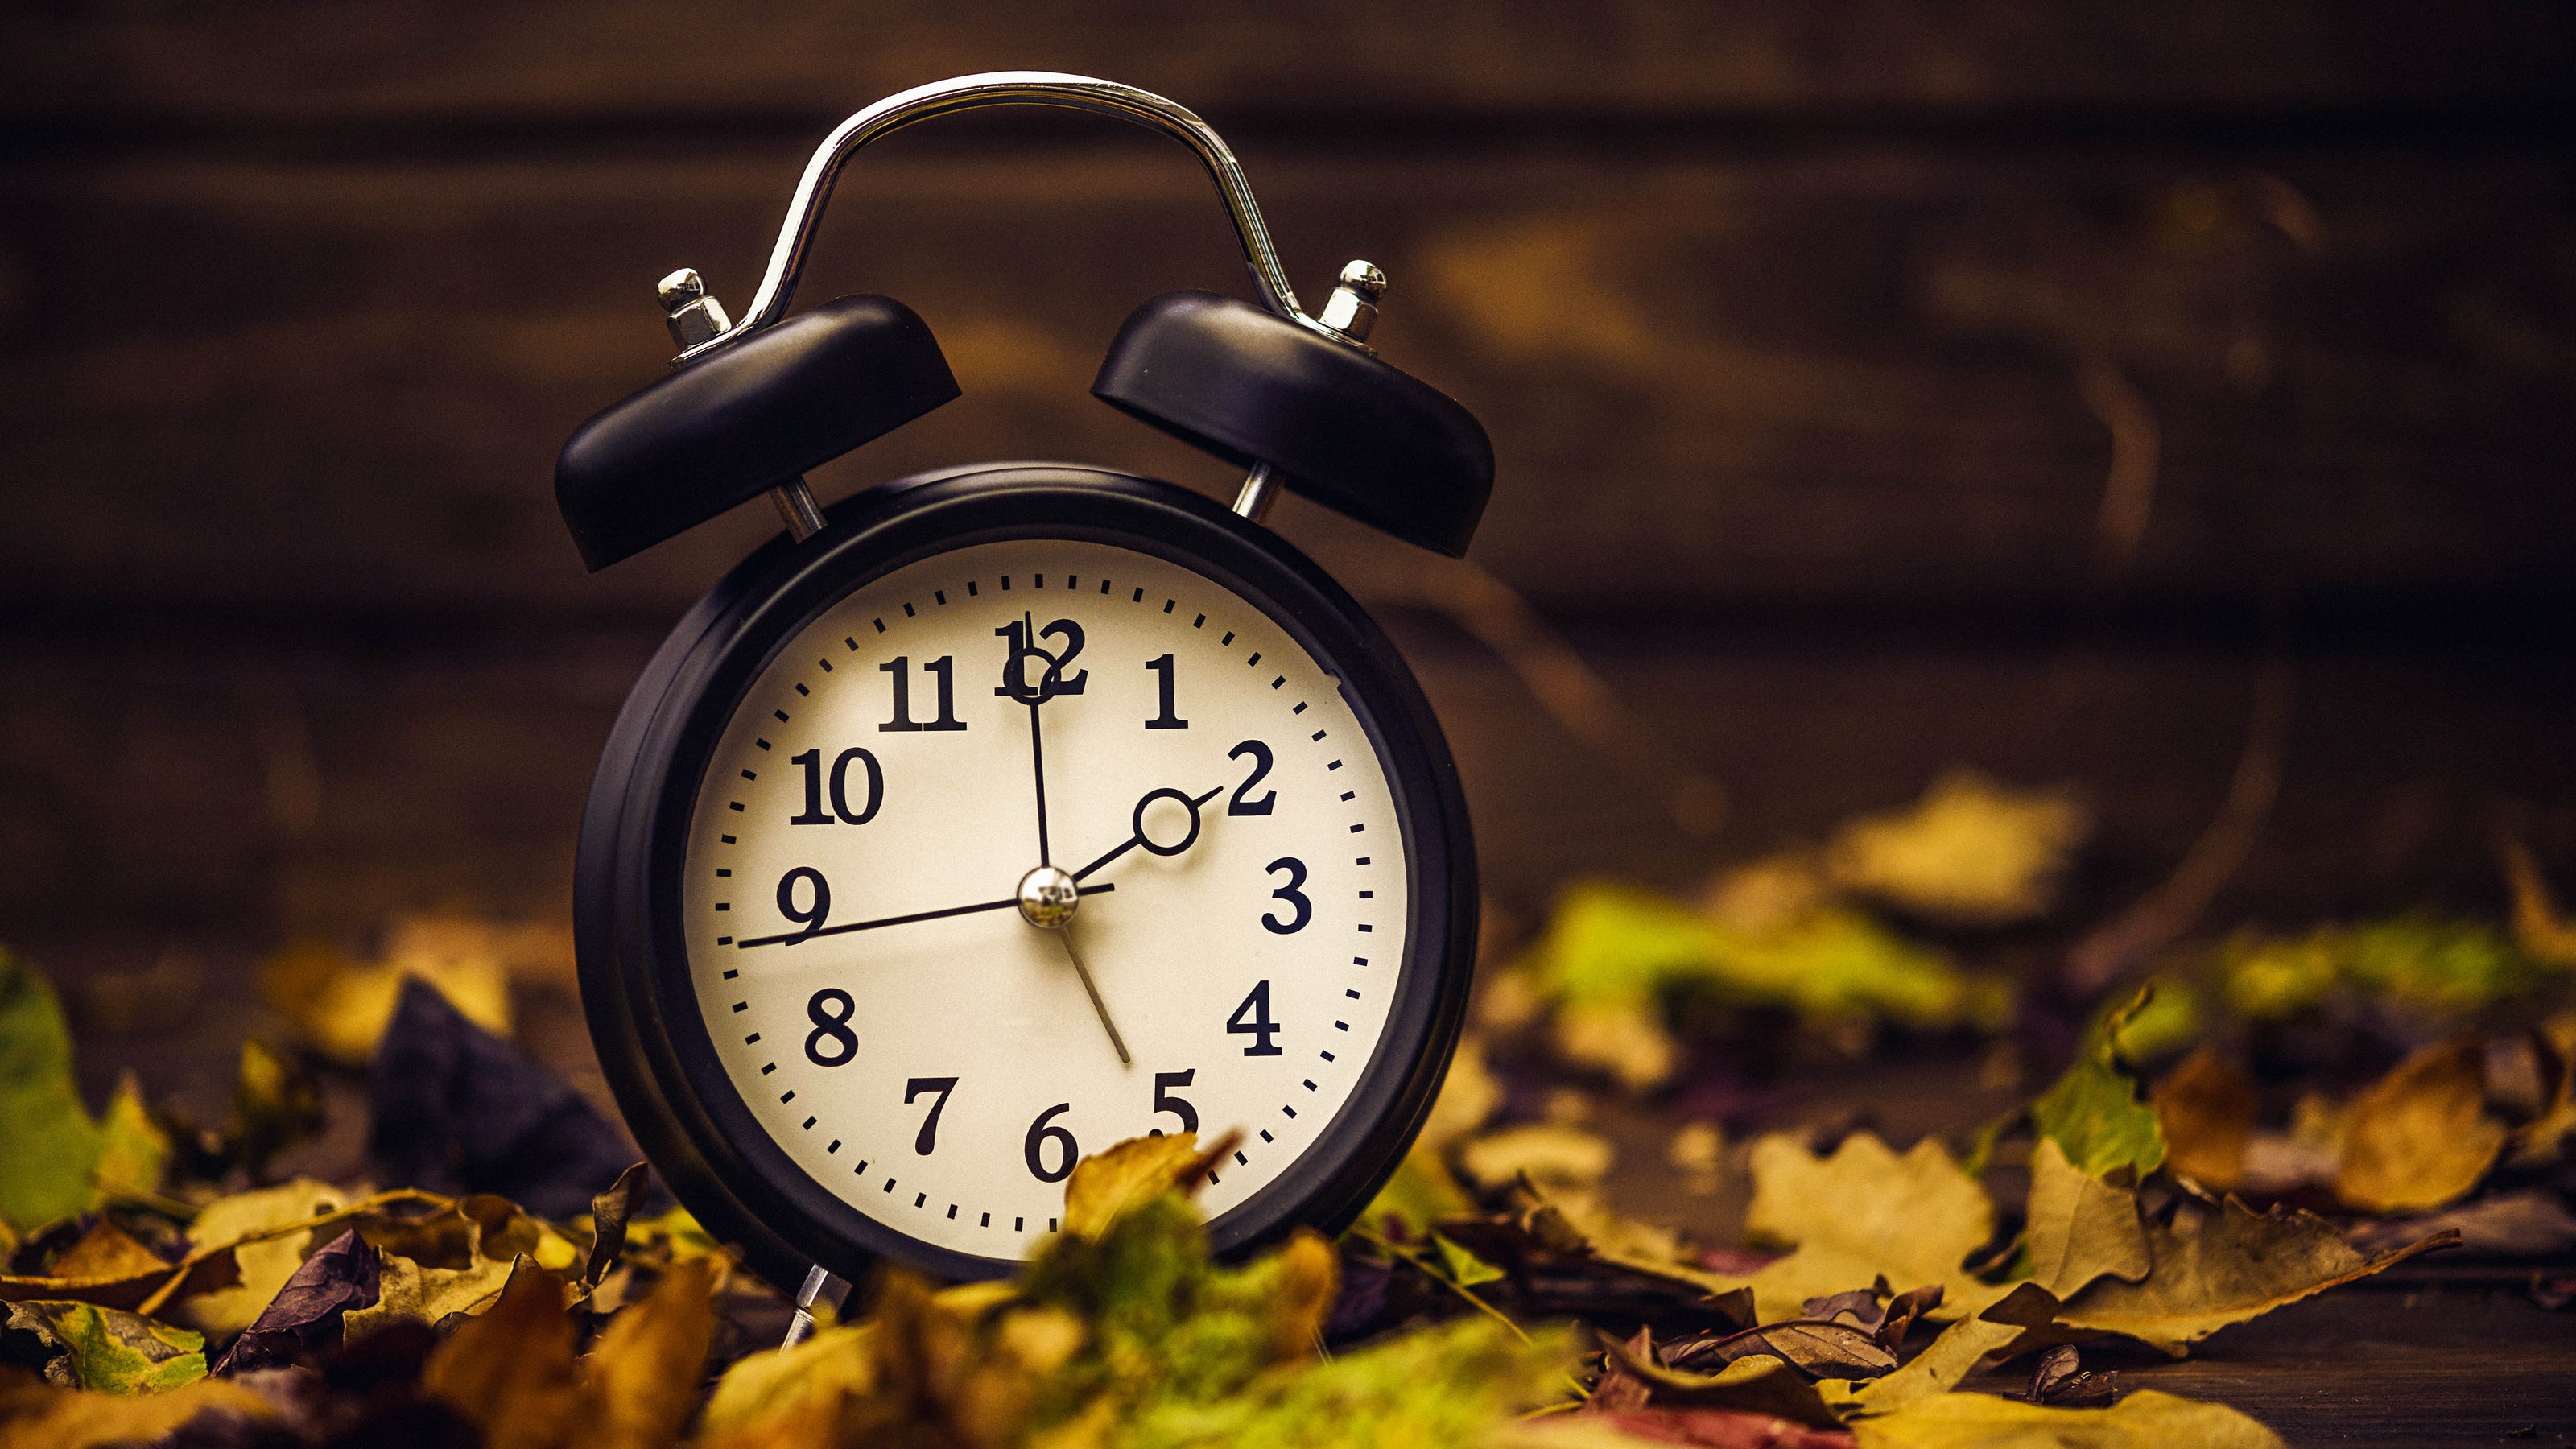 Daylight Savings Time 2022 ending soon. When to change your clocks.